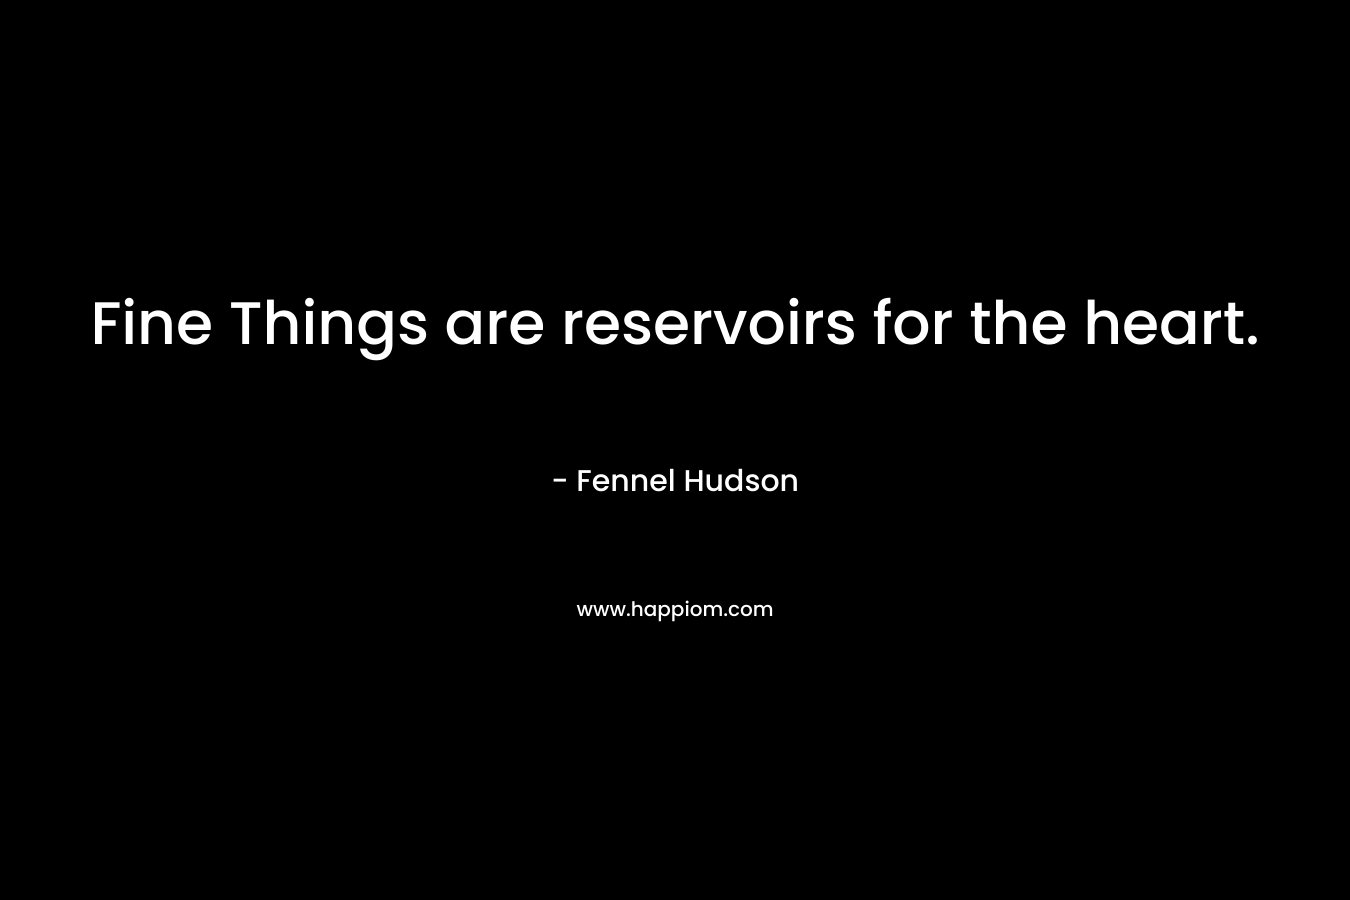 Fine Things are reservoirs for the heart. – Fennel Hudson